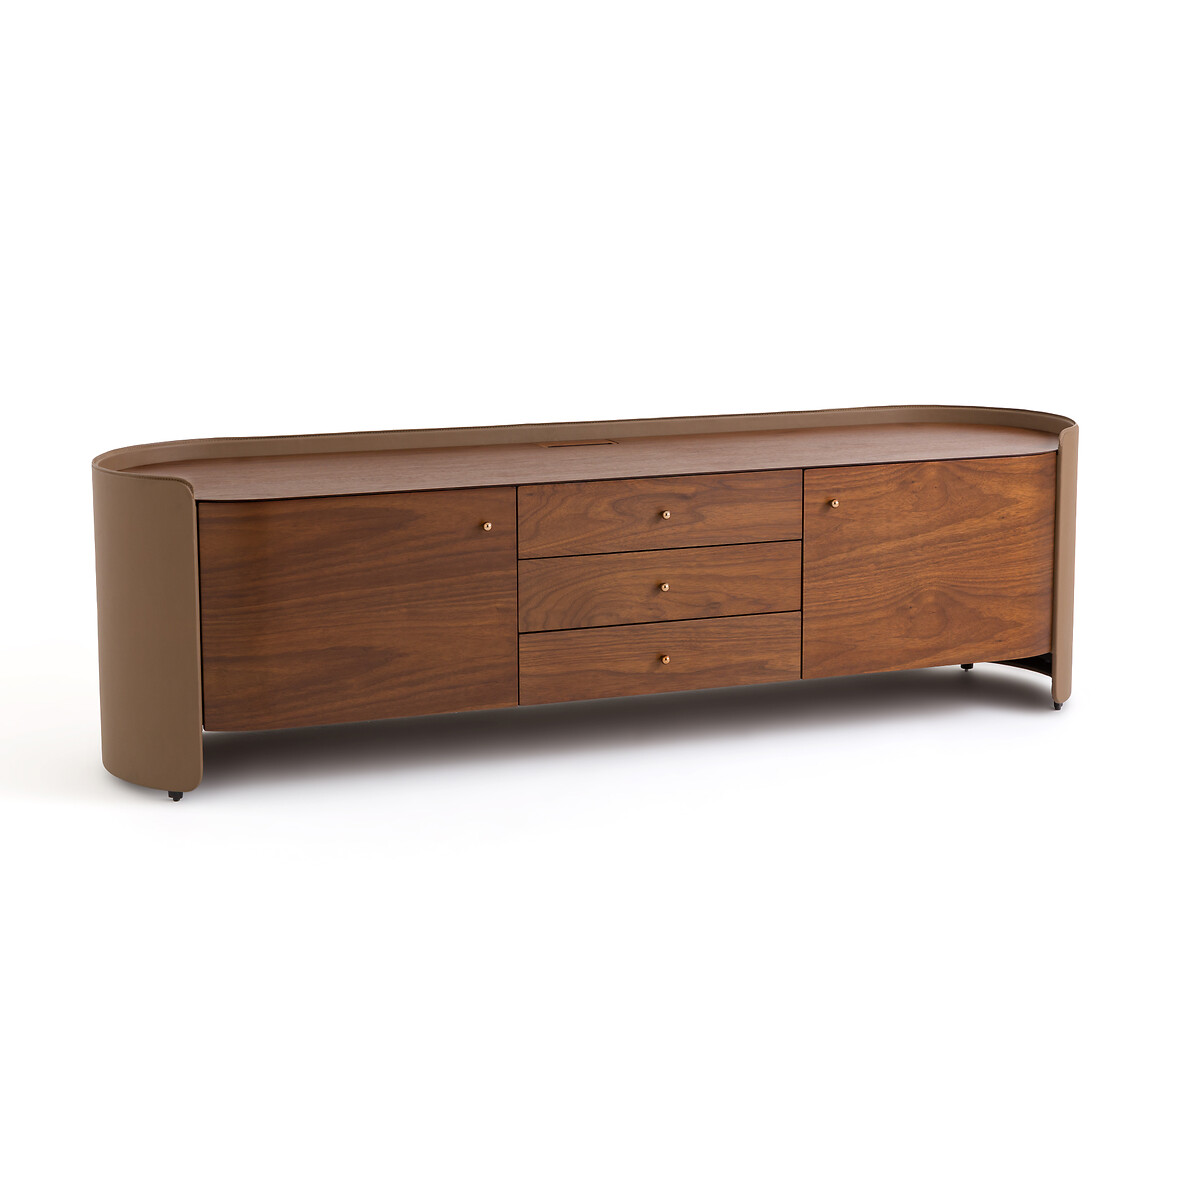 Firmo Walnut and Leather TV Cabinet